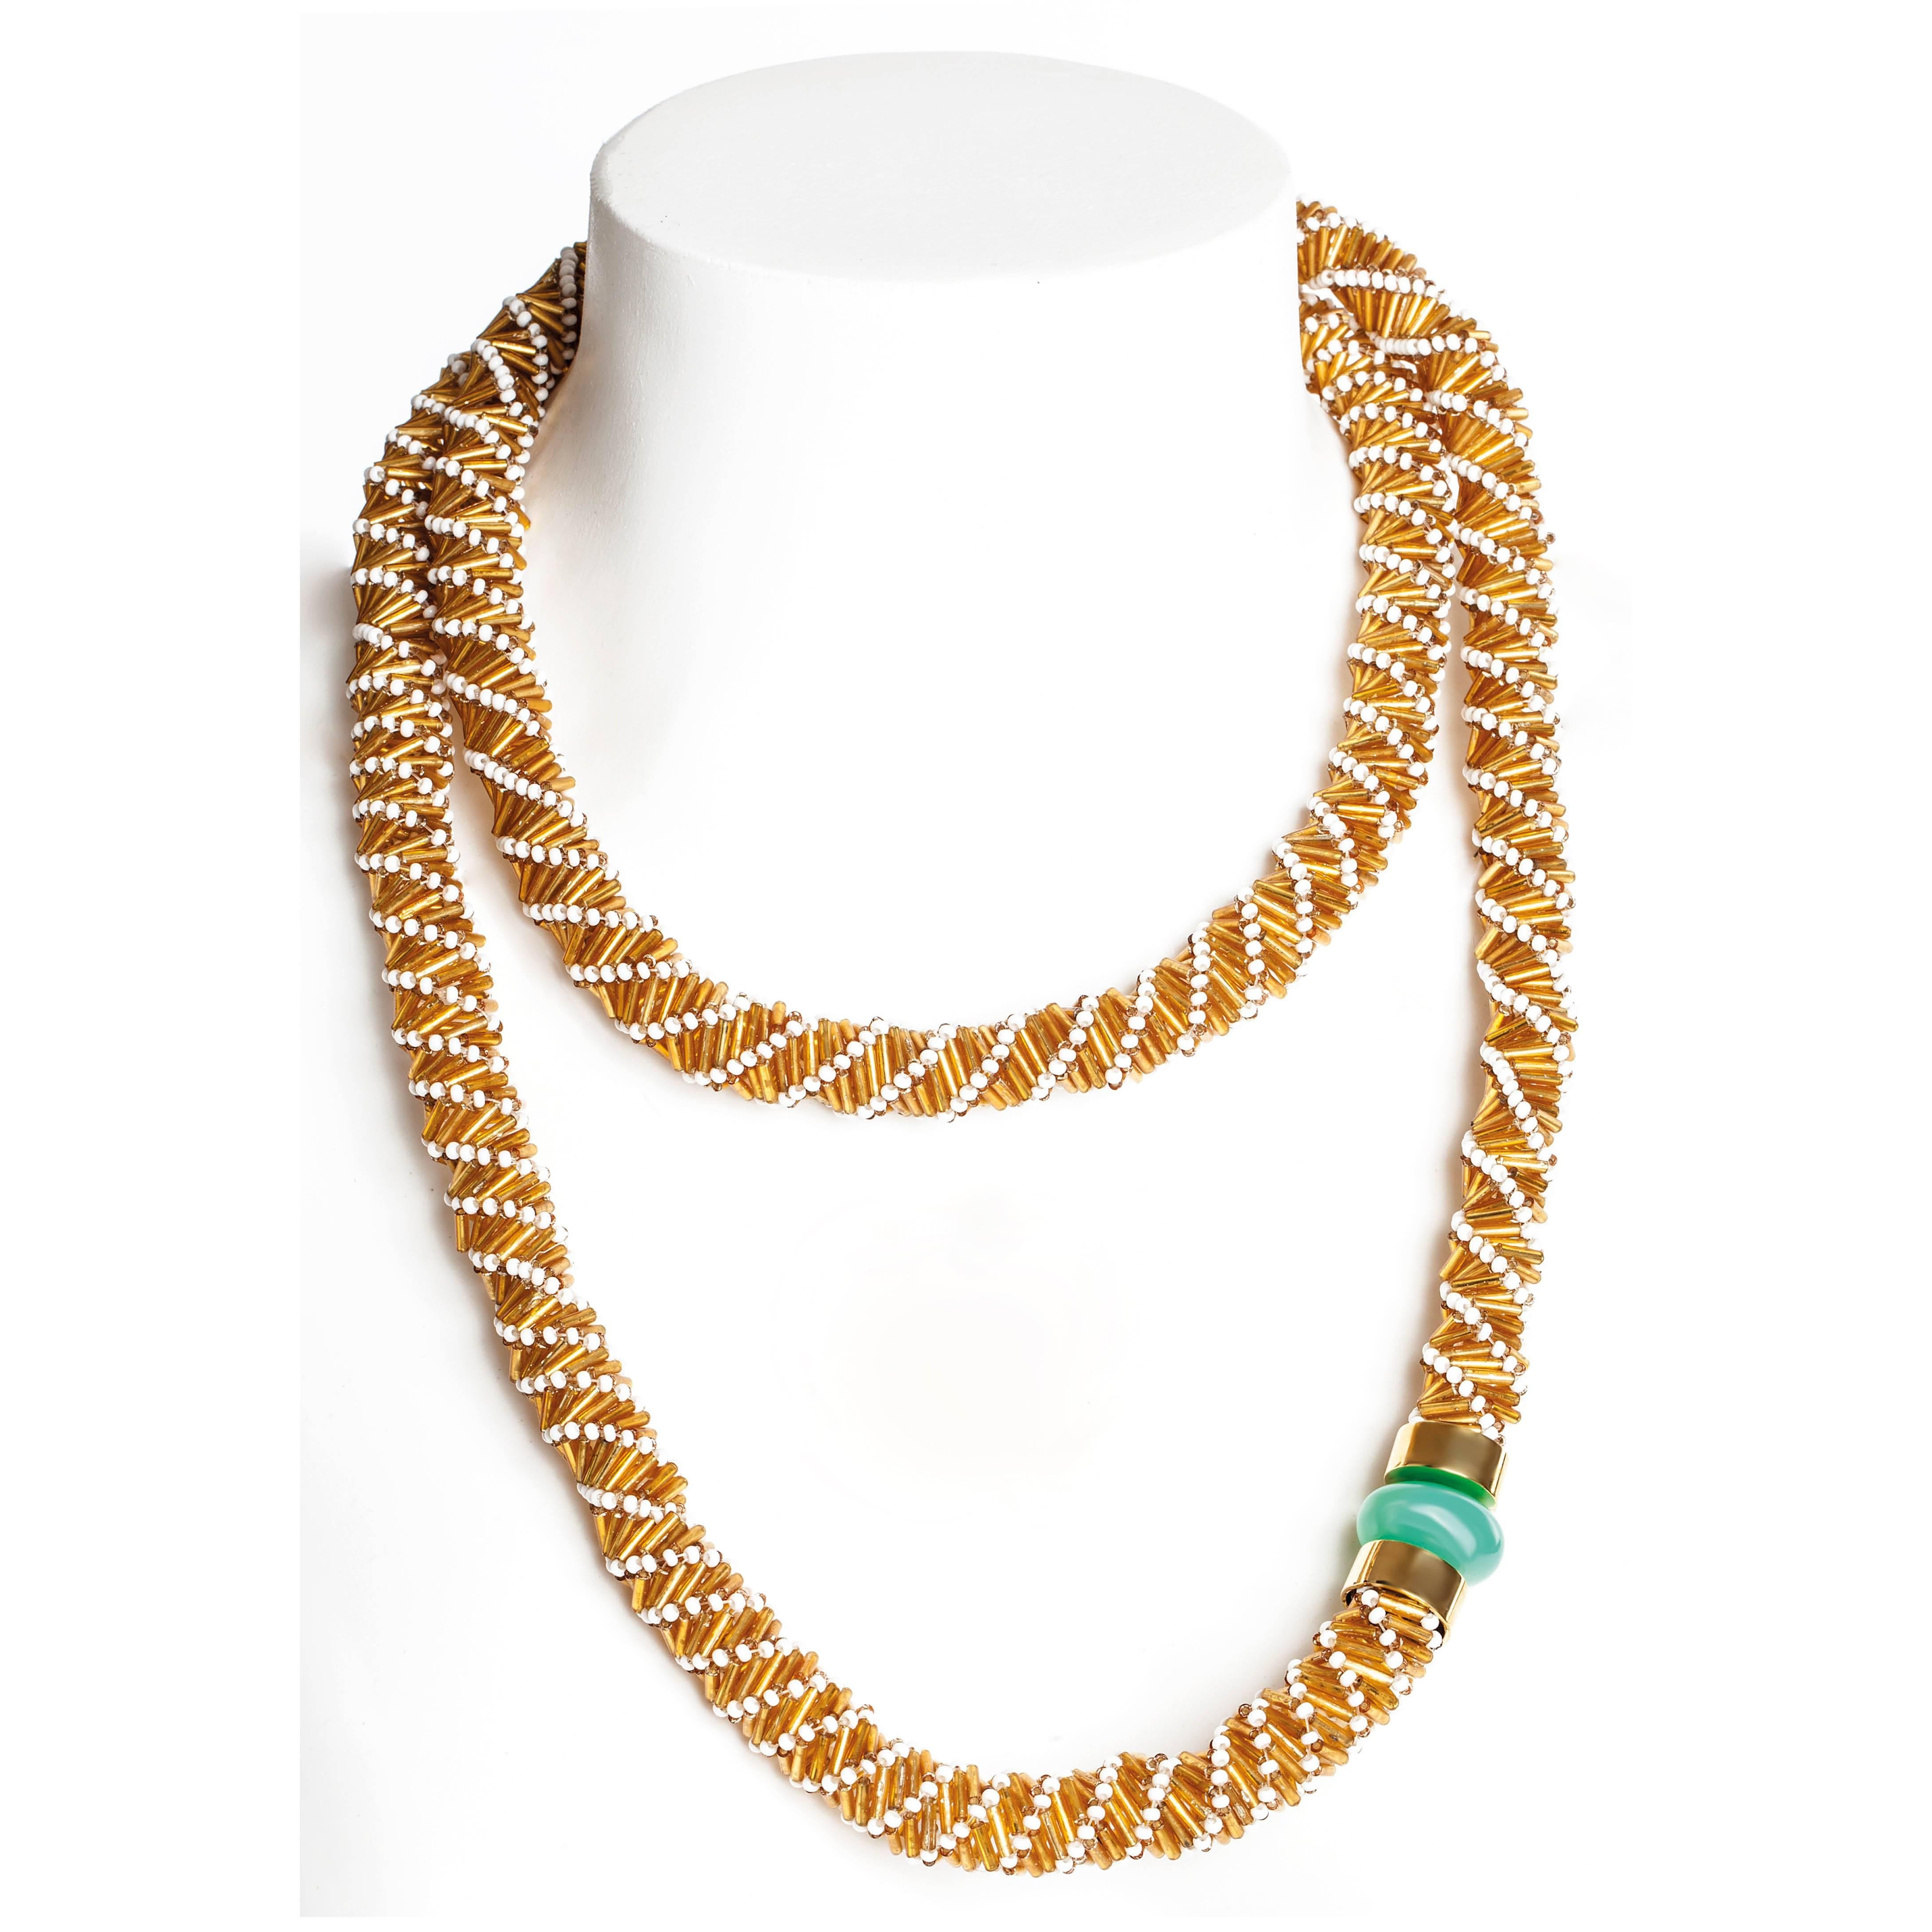 Hand beaded with the finest glass beads by Maasai women in Kenya; set with 20 carat natural chrysoprase gemstone bead and finished by hand in London with 18kt gold plated brass. Chrysoprase is sourced from conflict-free mines in Namibia and created